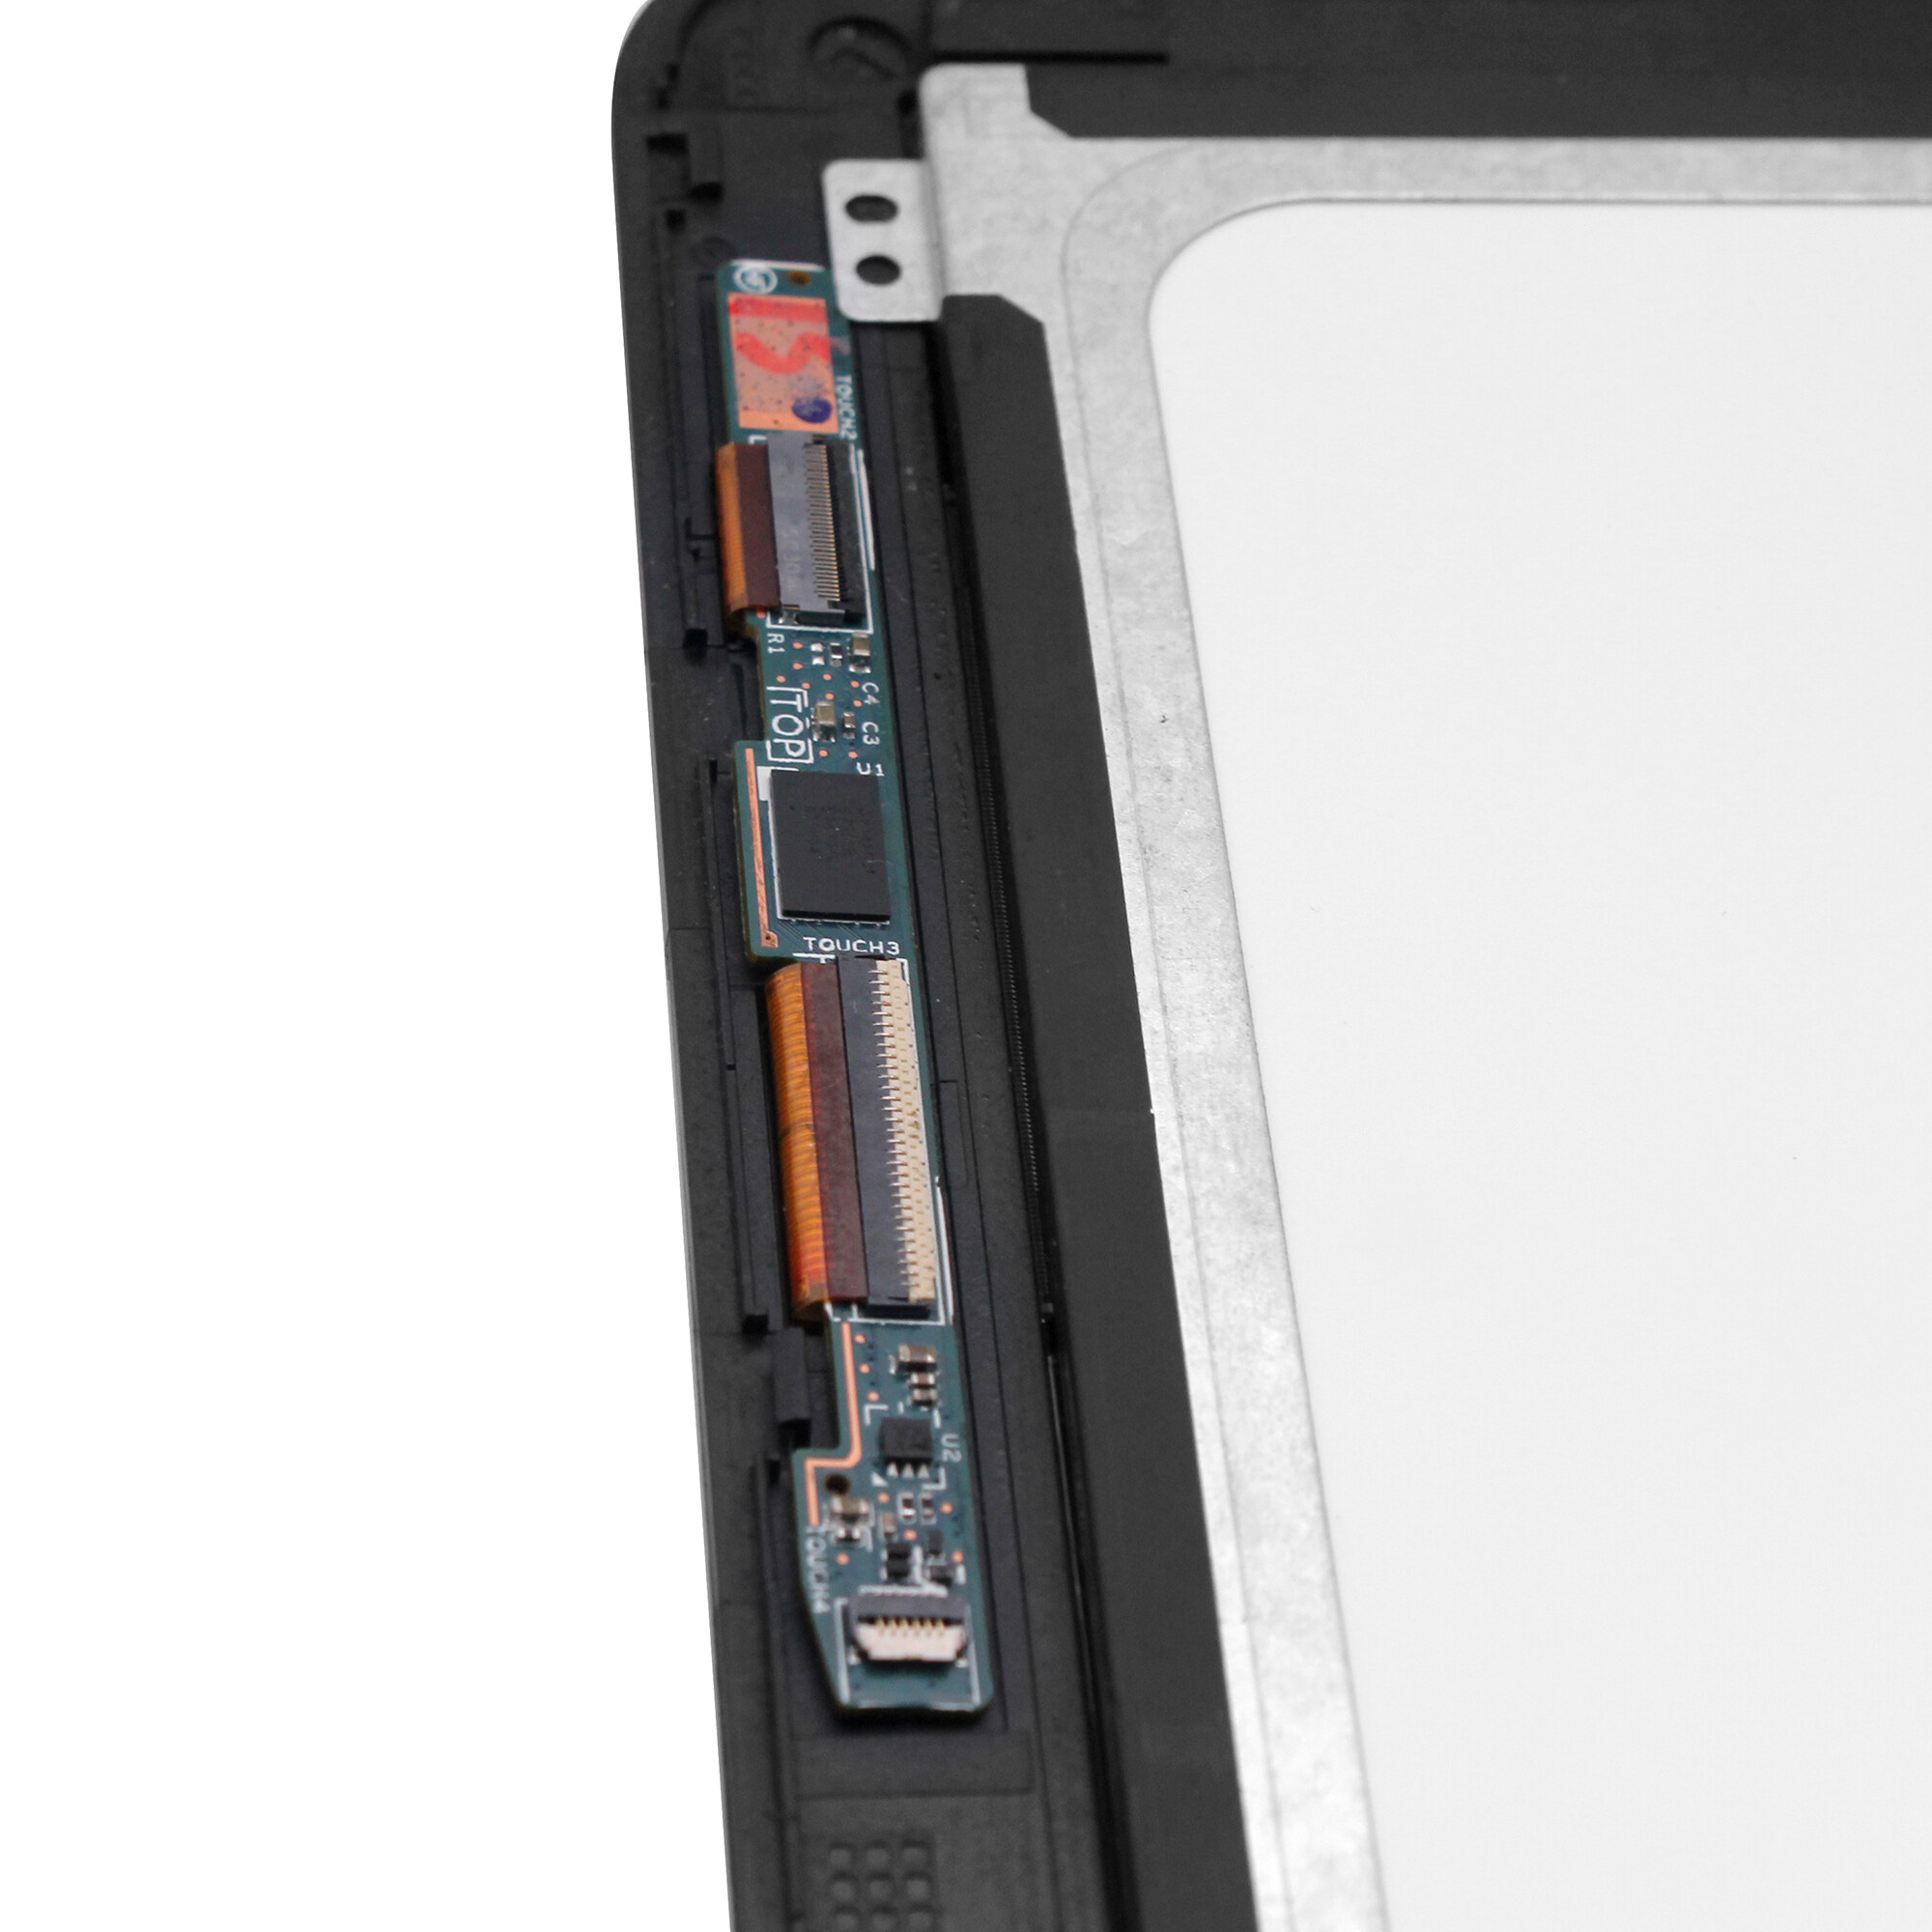 11.6" LCD Touch Screen Digitizer Display Assembly for HP Pavilion X360 11-K134TU